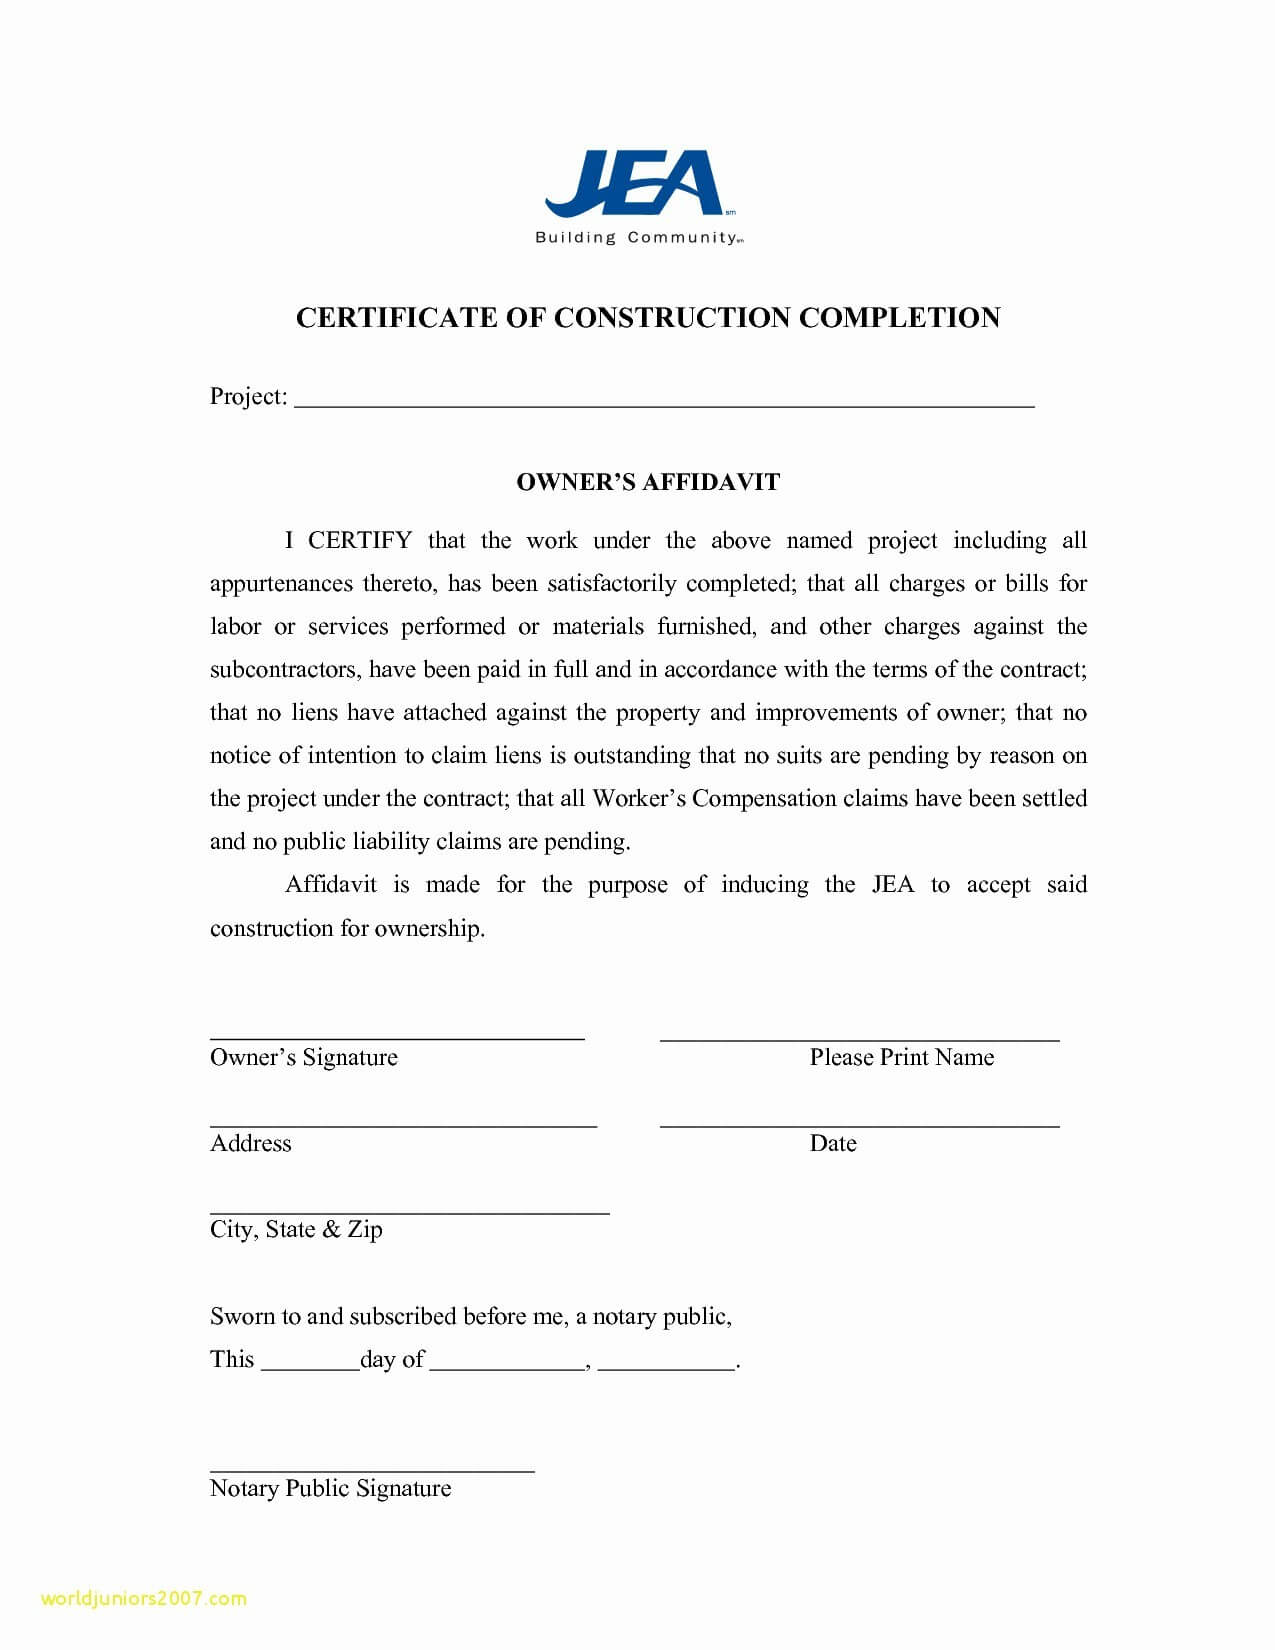 Letter Of Substantial Completion Template Examples | Letter With Regard To Practical Completion Certificate Template Jct